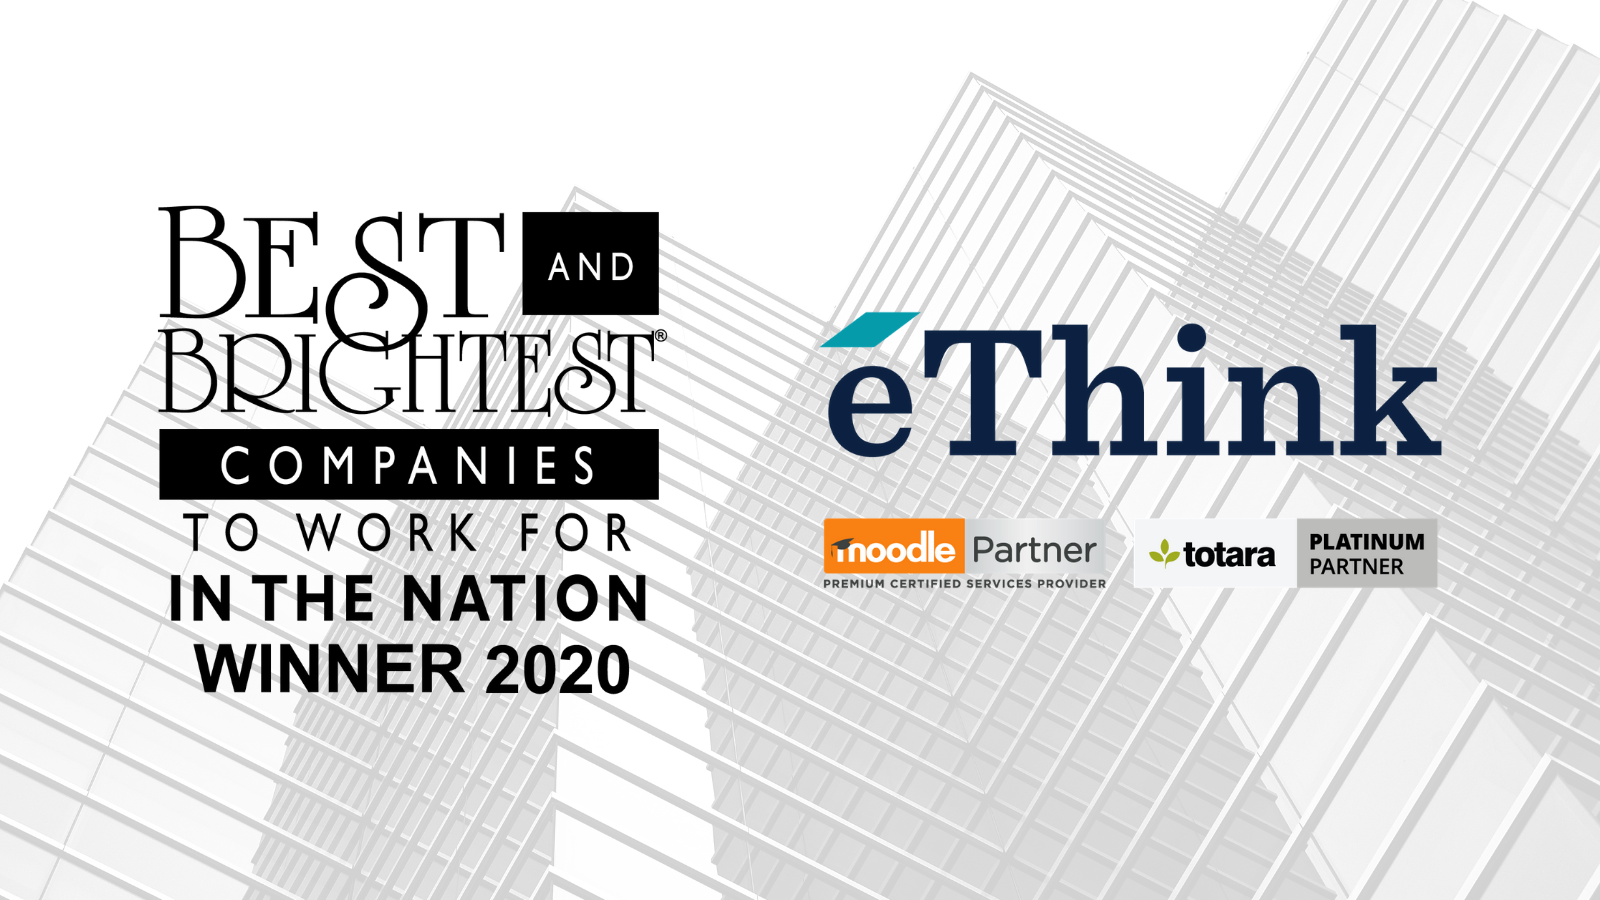 eThink Wins Best and Brightest Award